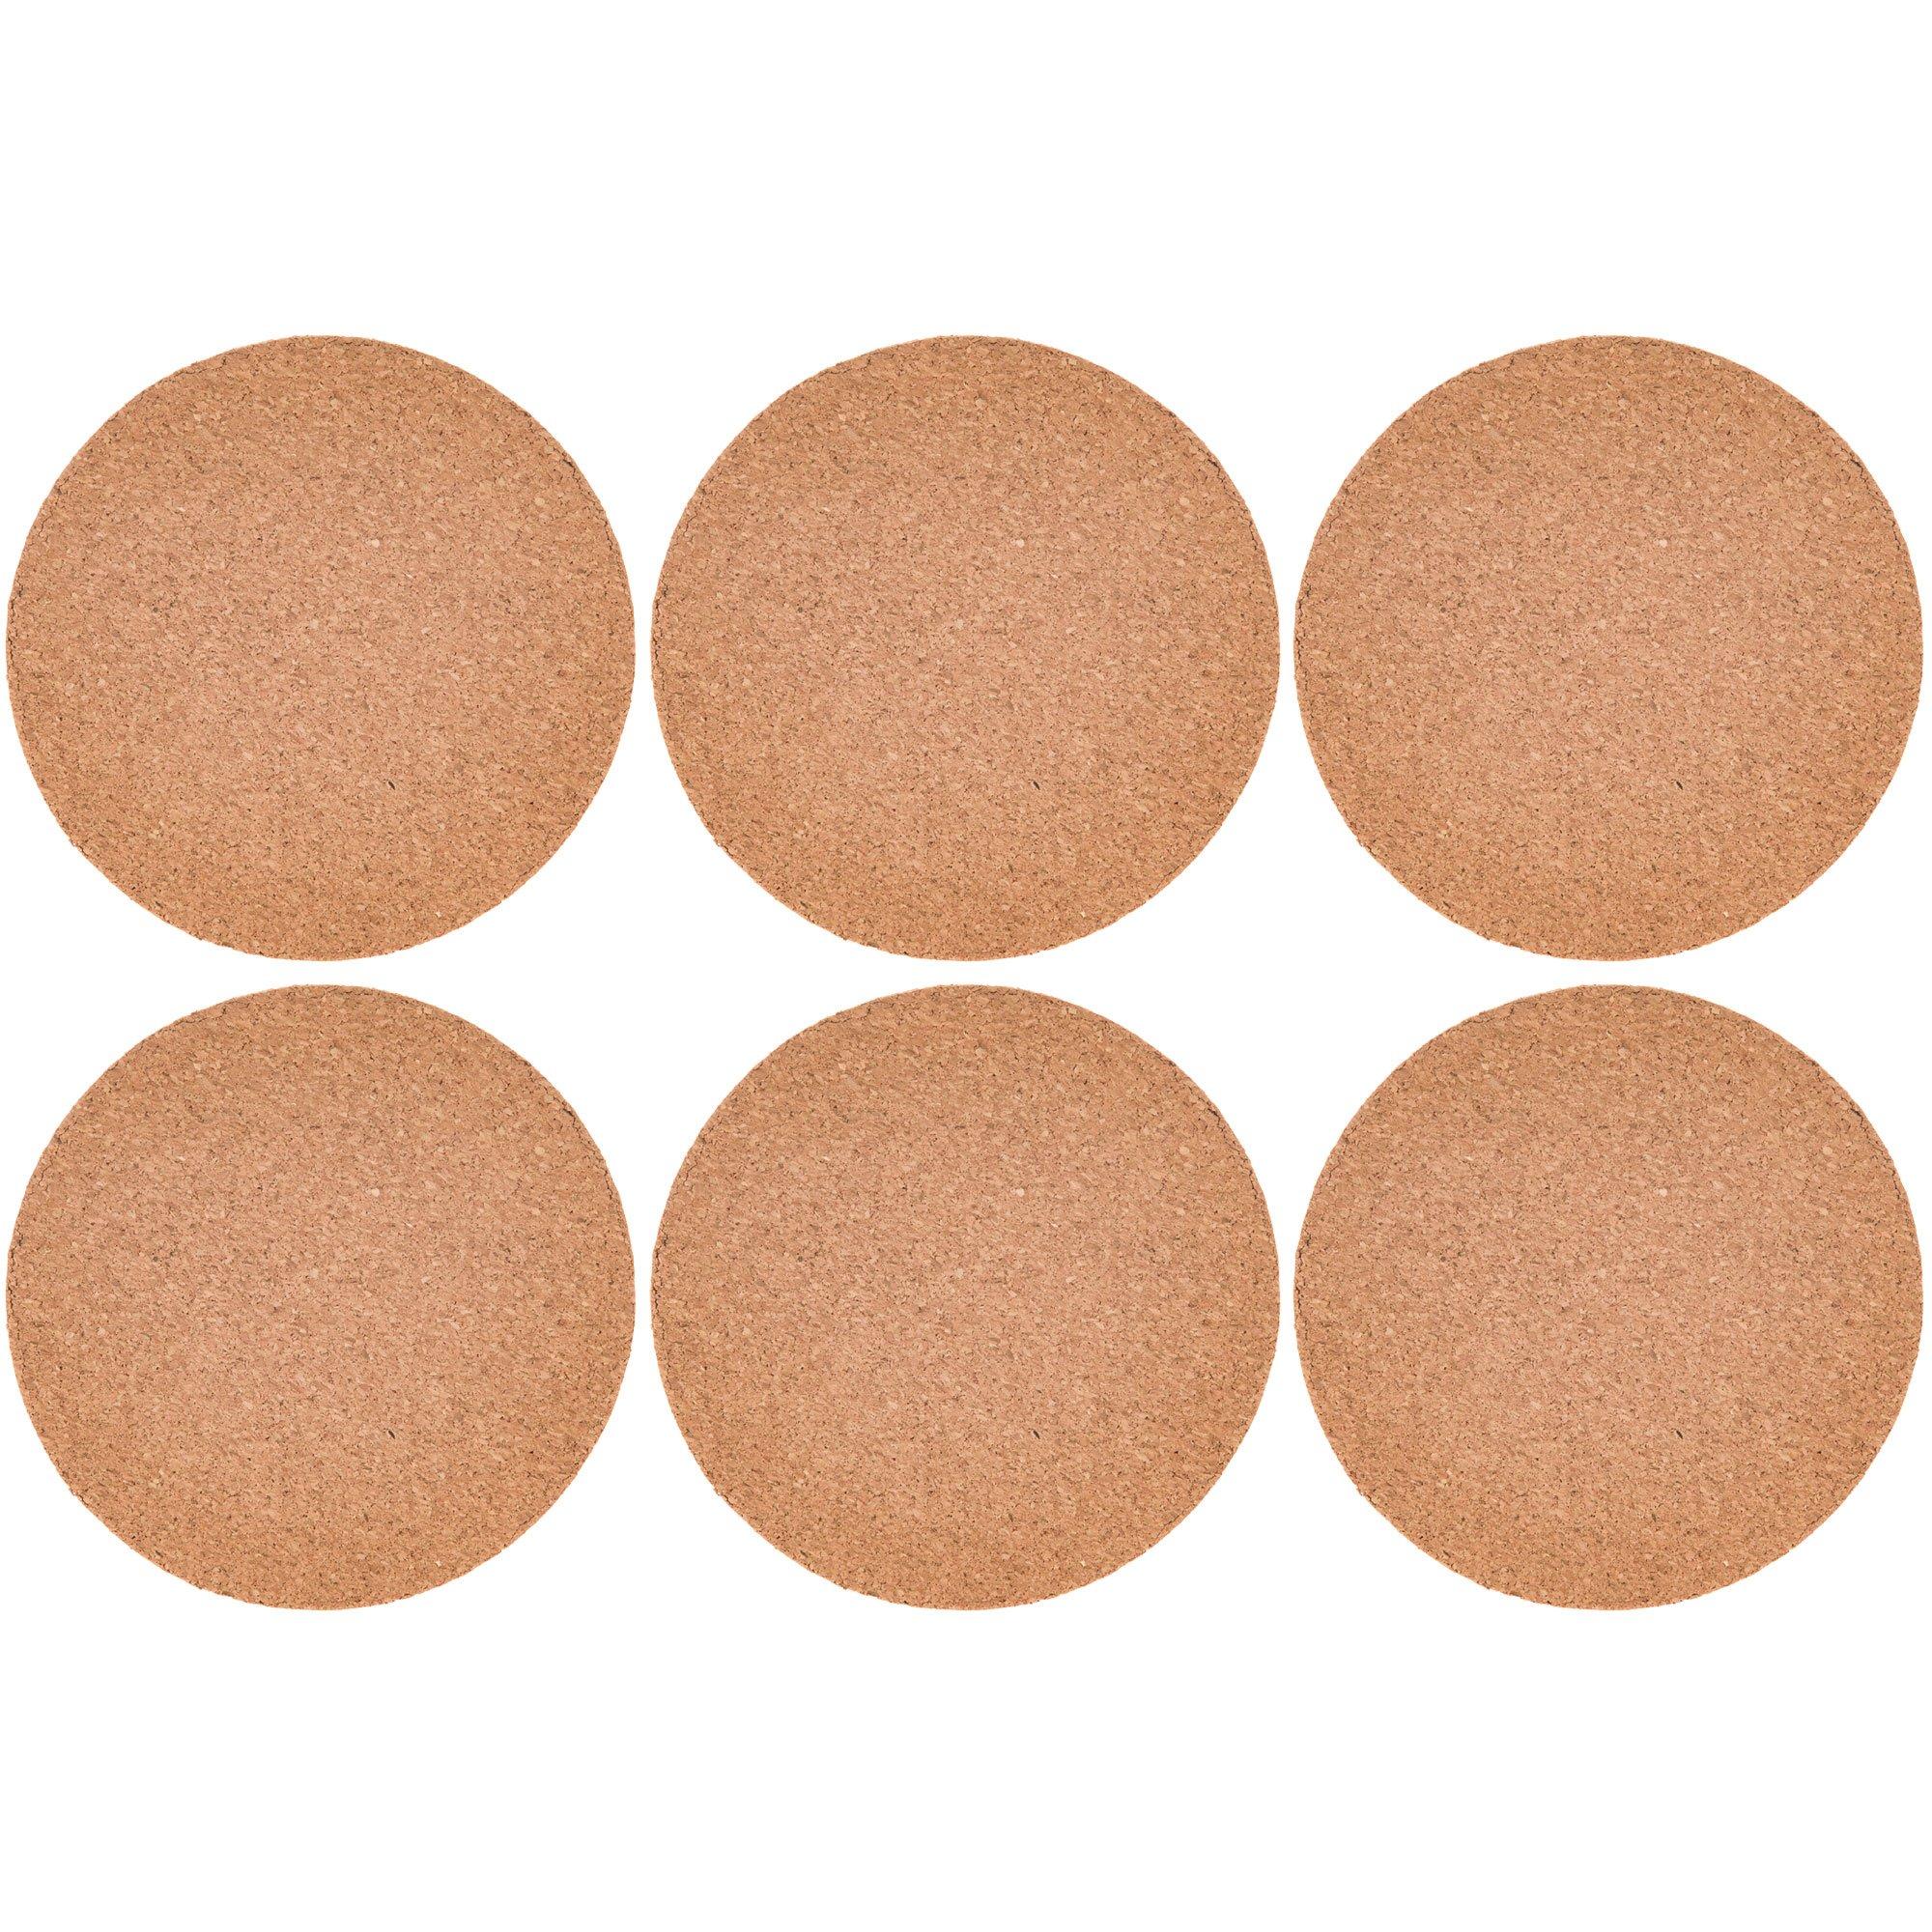 Betus Round Cork Coasters 4 in. Diameter and 1/5 in. Thick Brown with Metal  Holder Bulk Set (16-Piece) B.Coaster.Cork.16Pc - The Home Depot